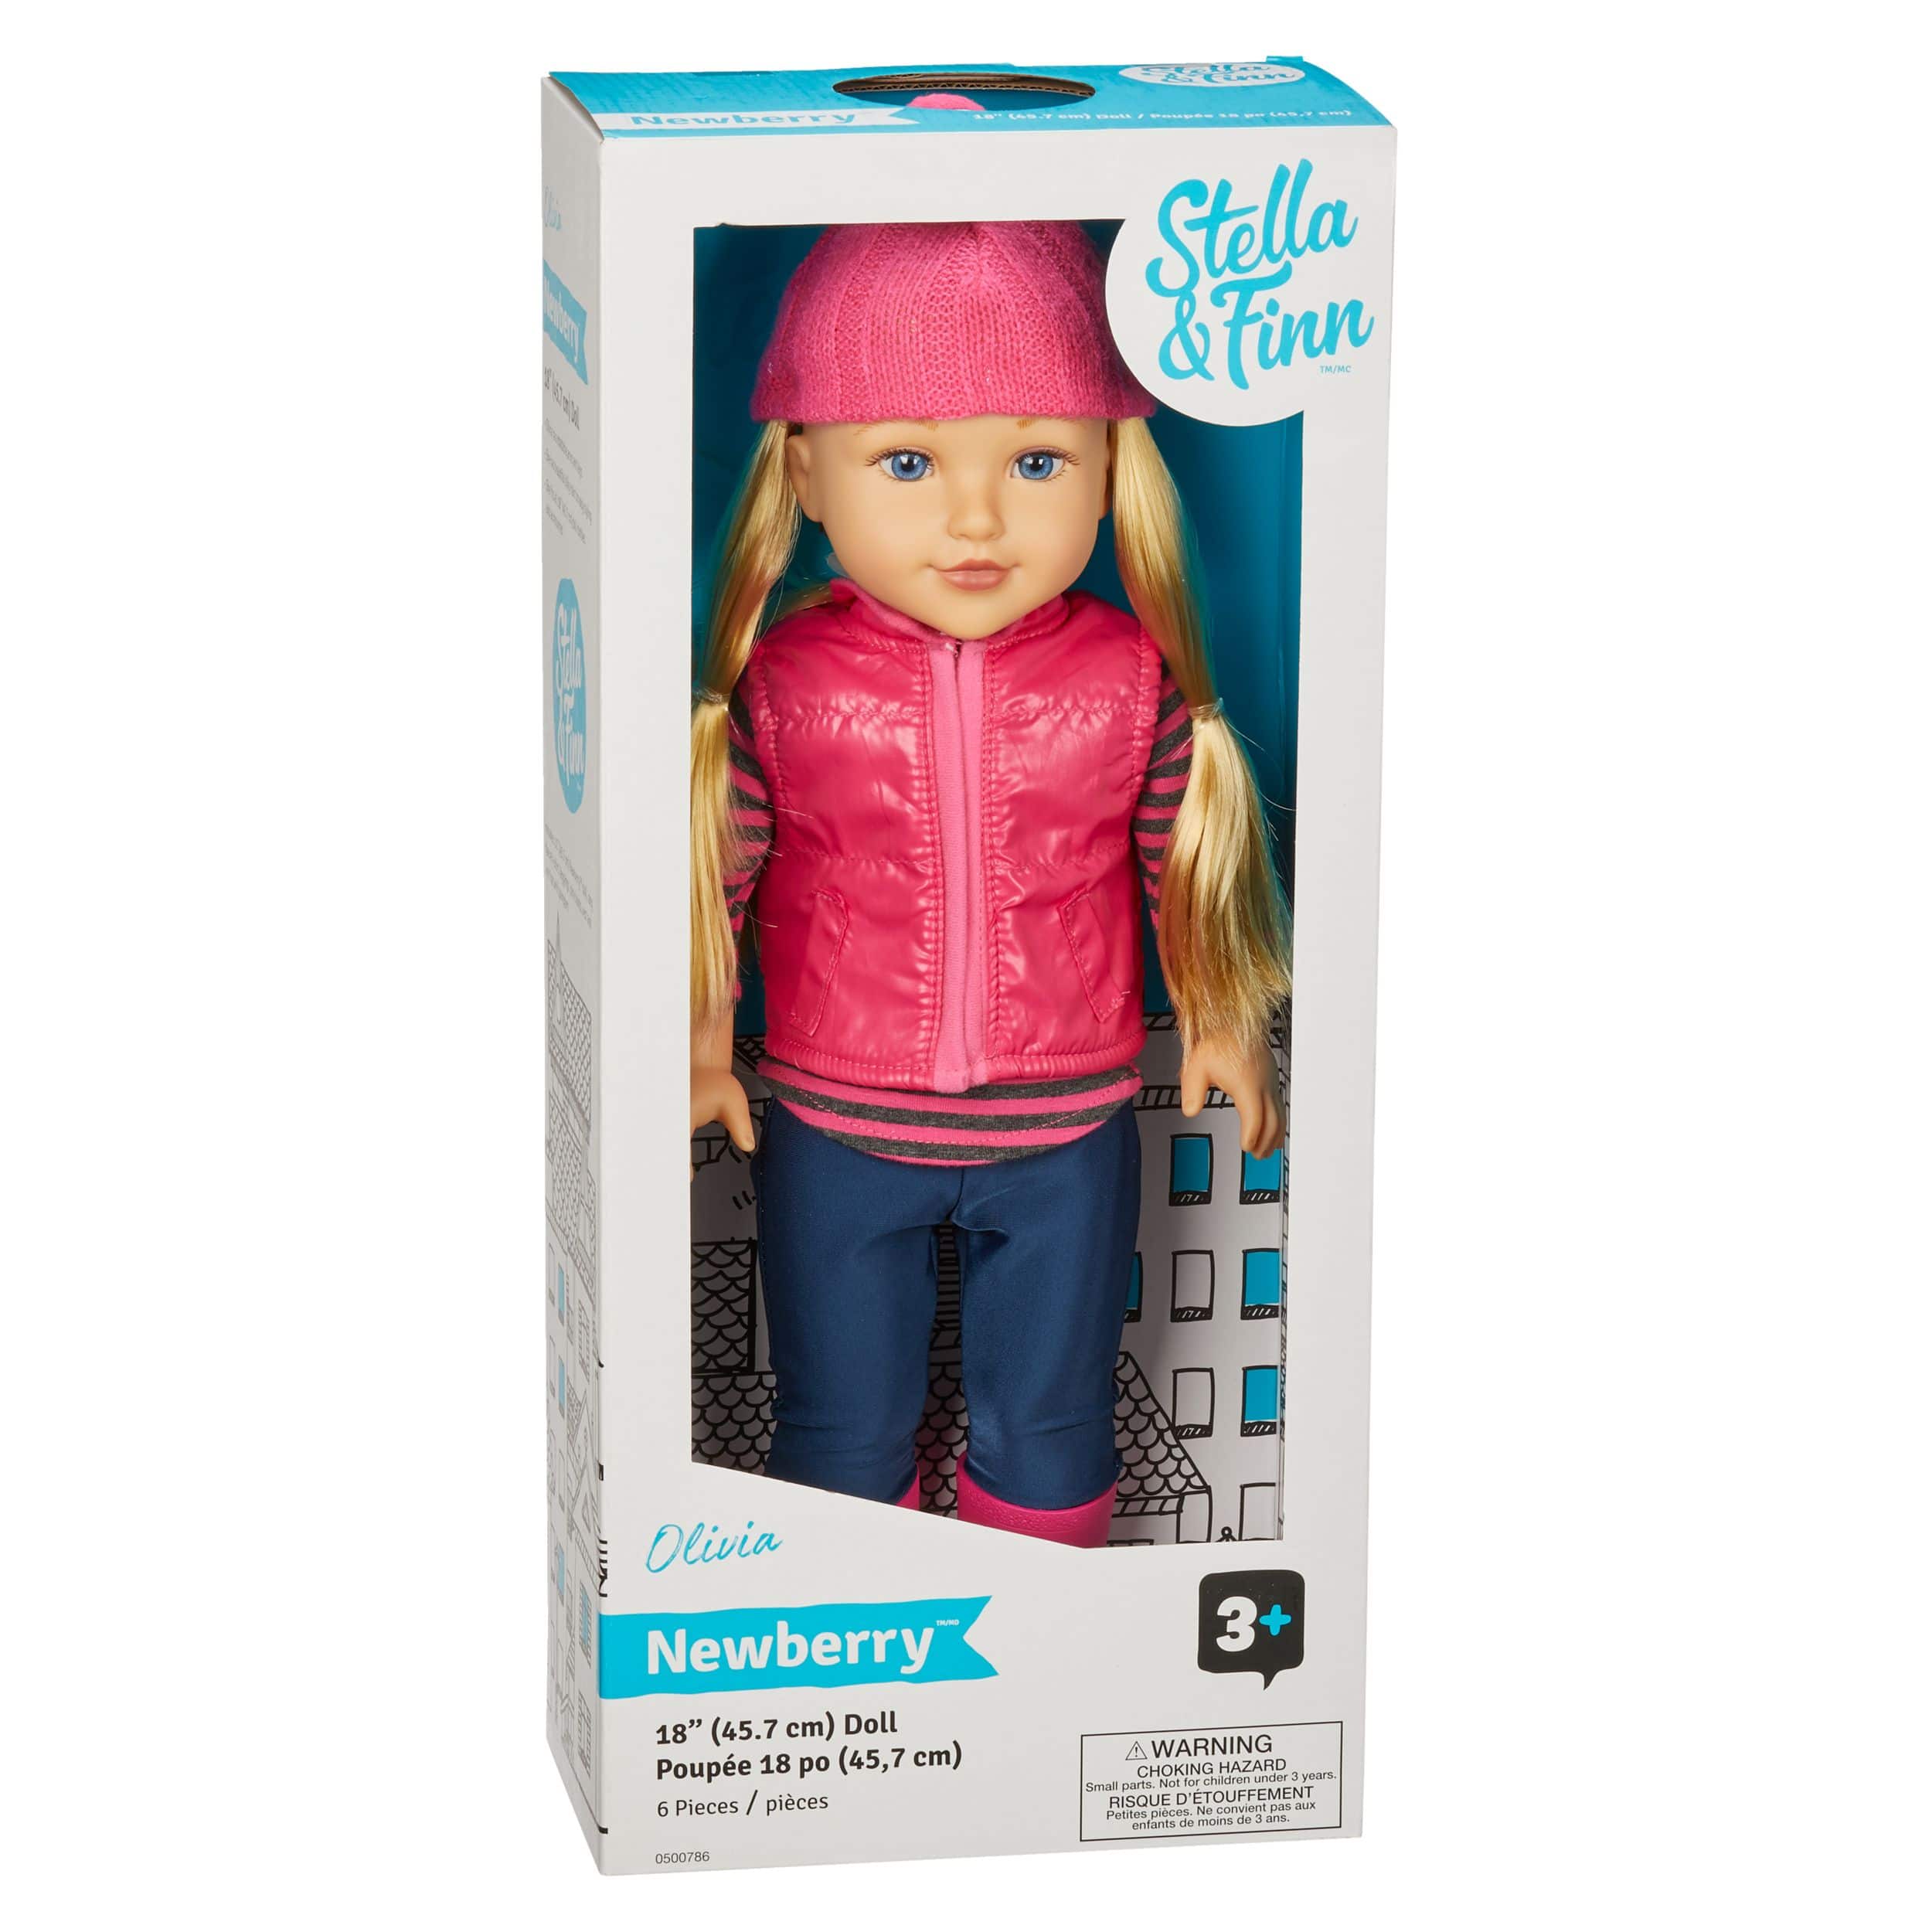 Stella & Finn Newberry Deluxe Doll, Olivia, 18-in Toy Figure for